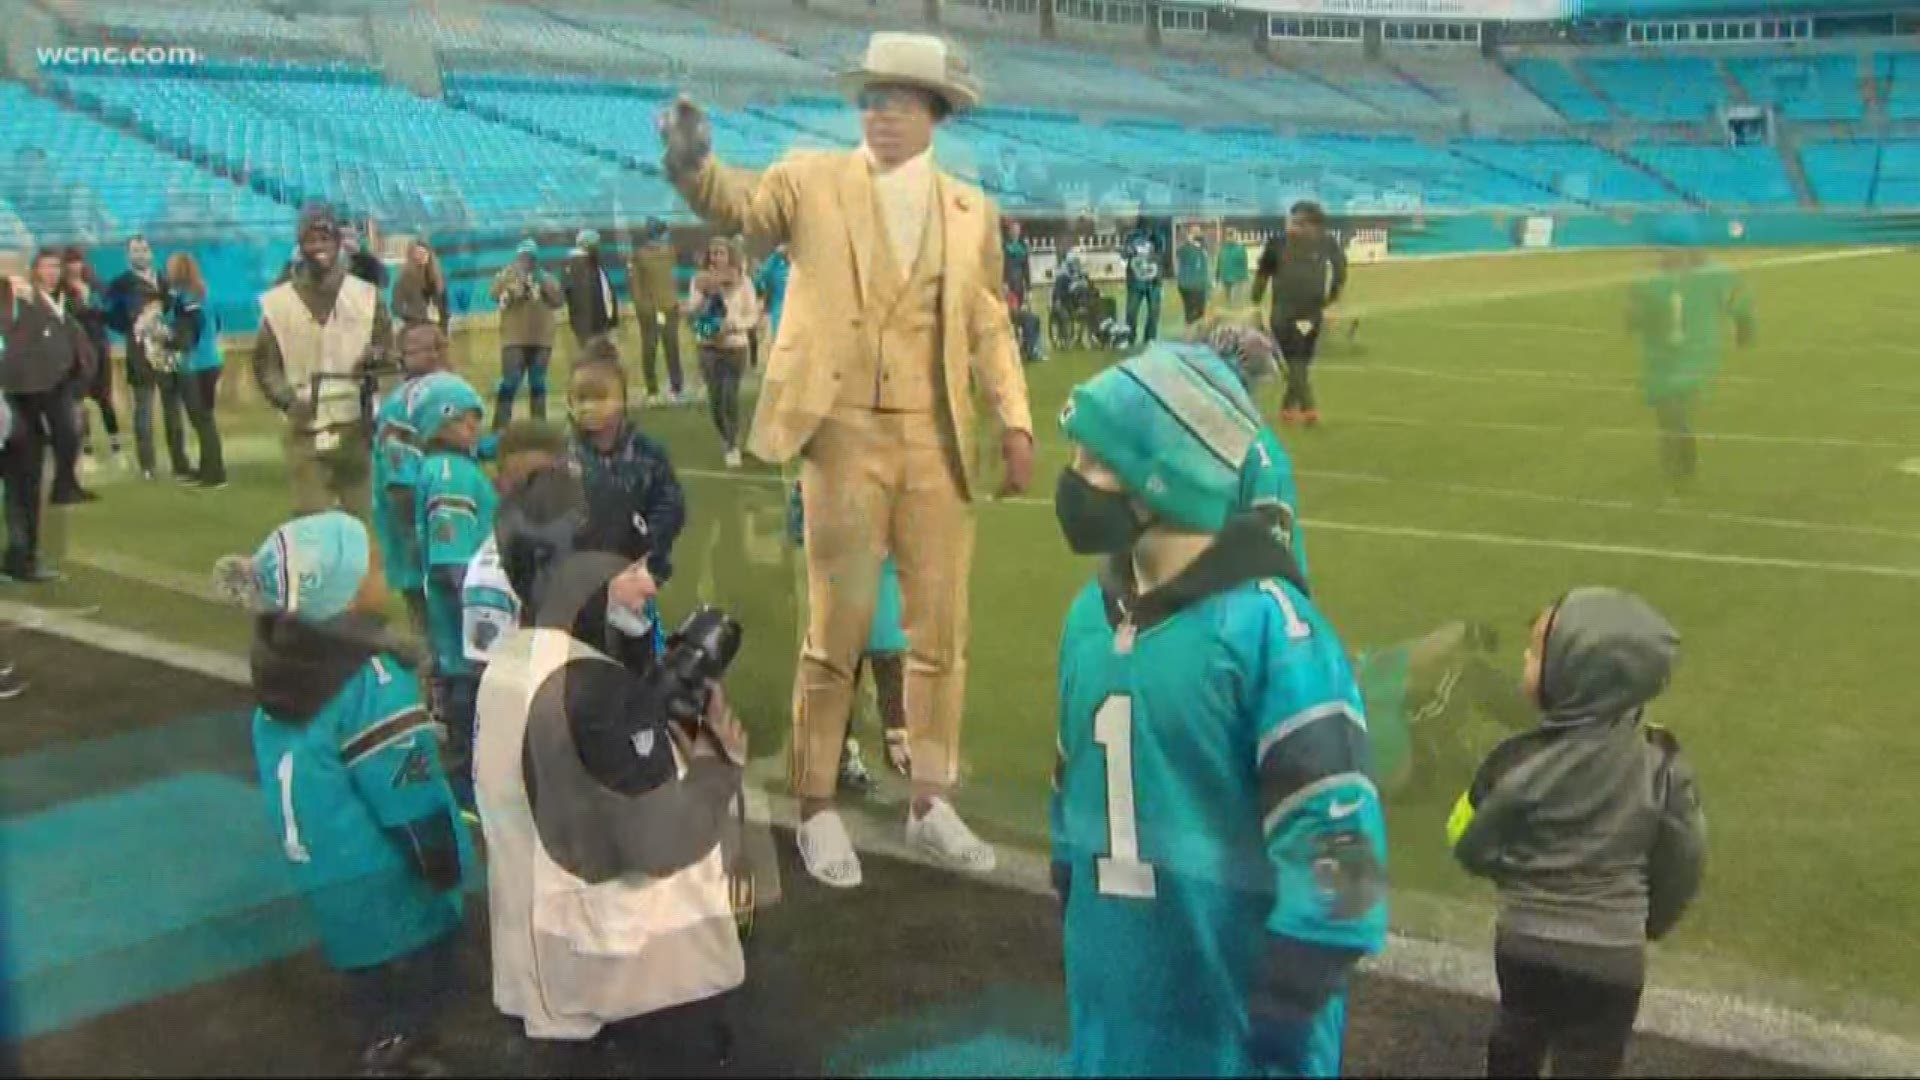 Even though Cam Newton didn't play, he was spreading some Christmas cheer after the game.